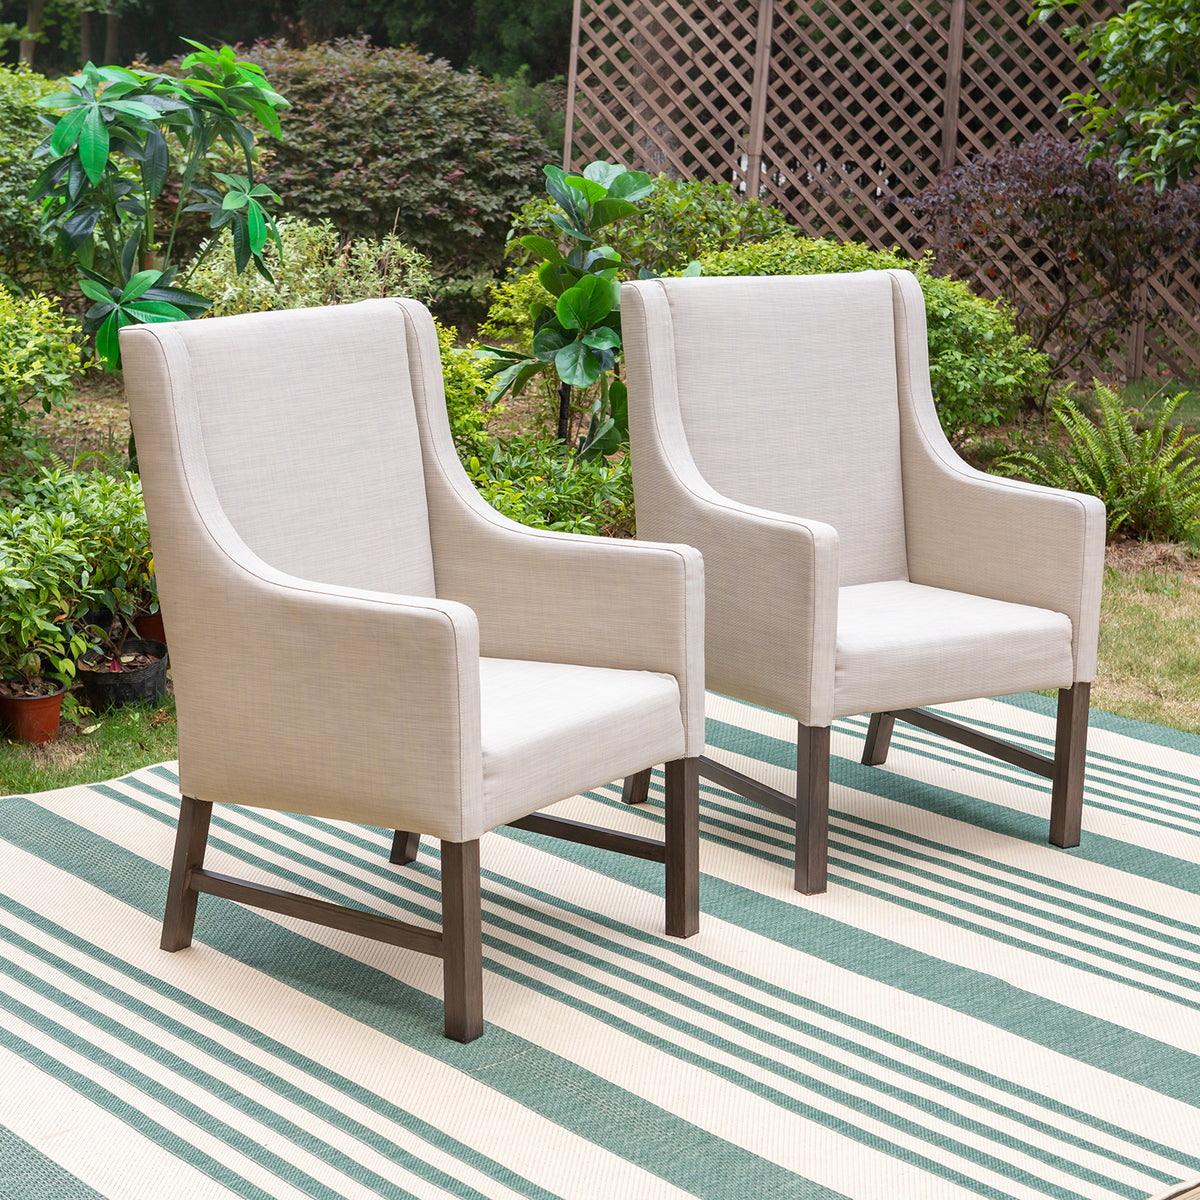 PHI VILLA Patio Textilene Fabric Padded Accent Chairs, Set of 2